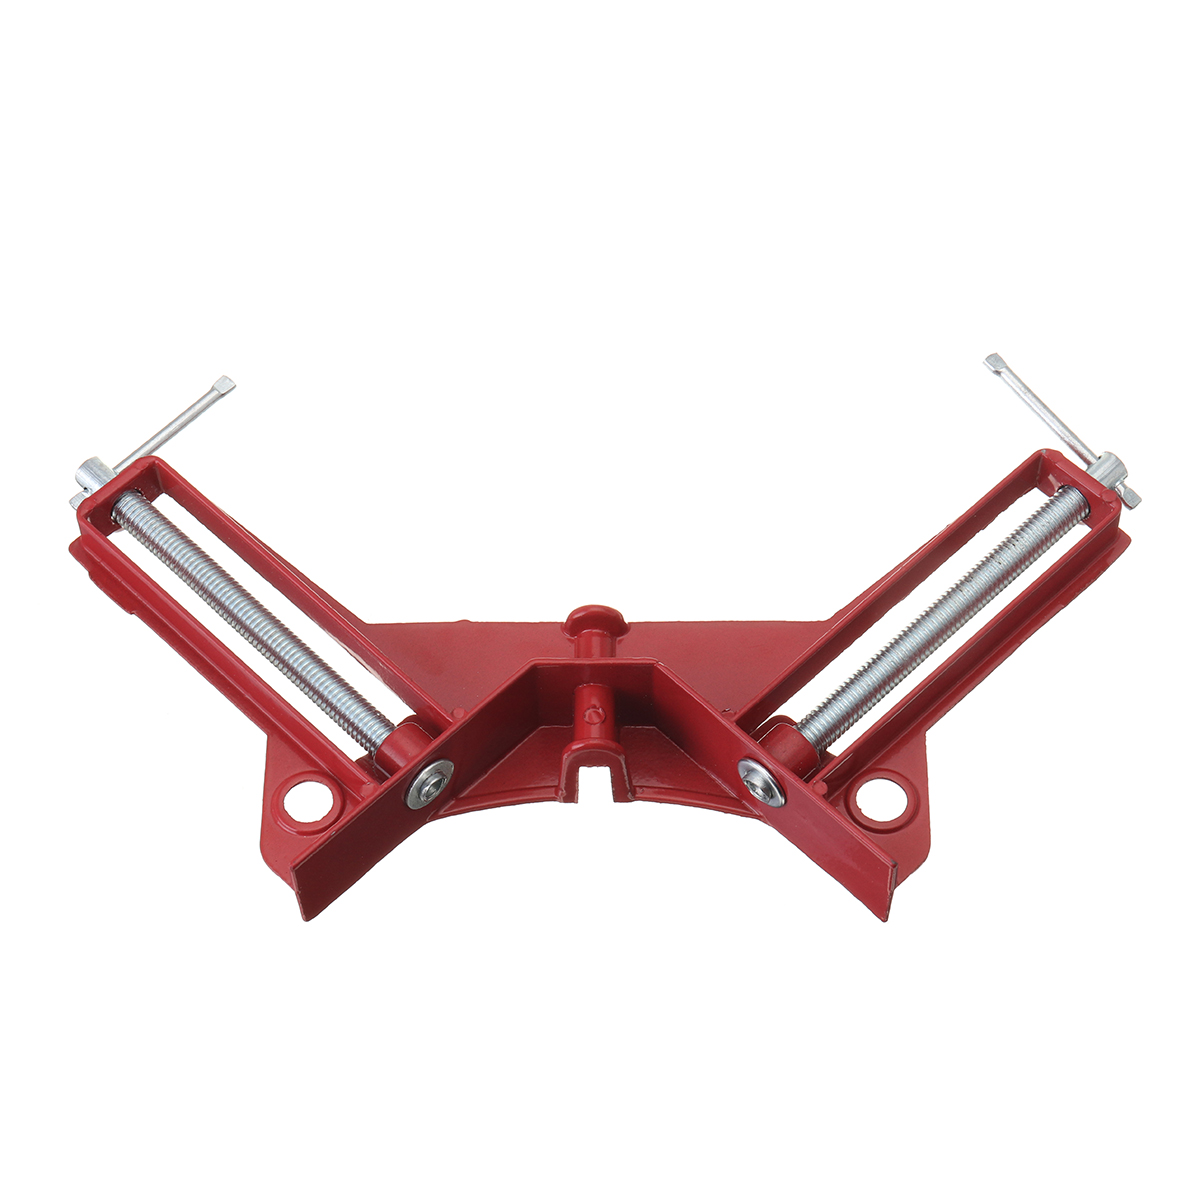 90-Degree-Right-Angle-Clamp-WoodWorking-Miter-Picture-Frame-Corner-Tank-Clip-Holder-1294798-7